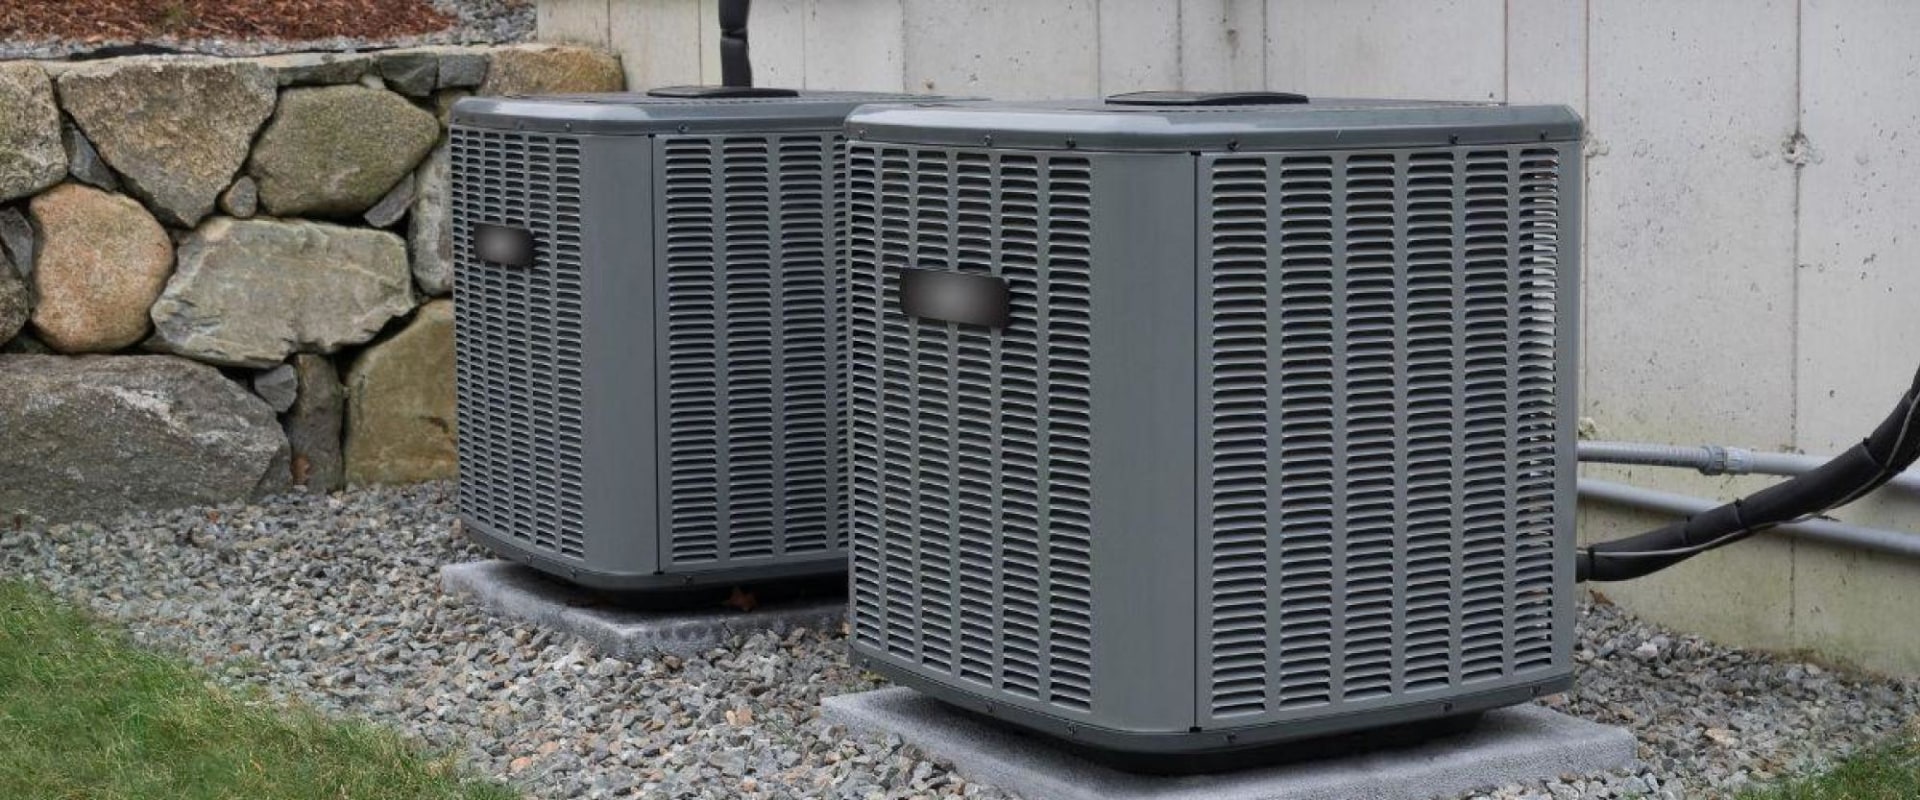 How Often Should You Get Your AC Tuned Up?